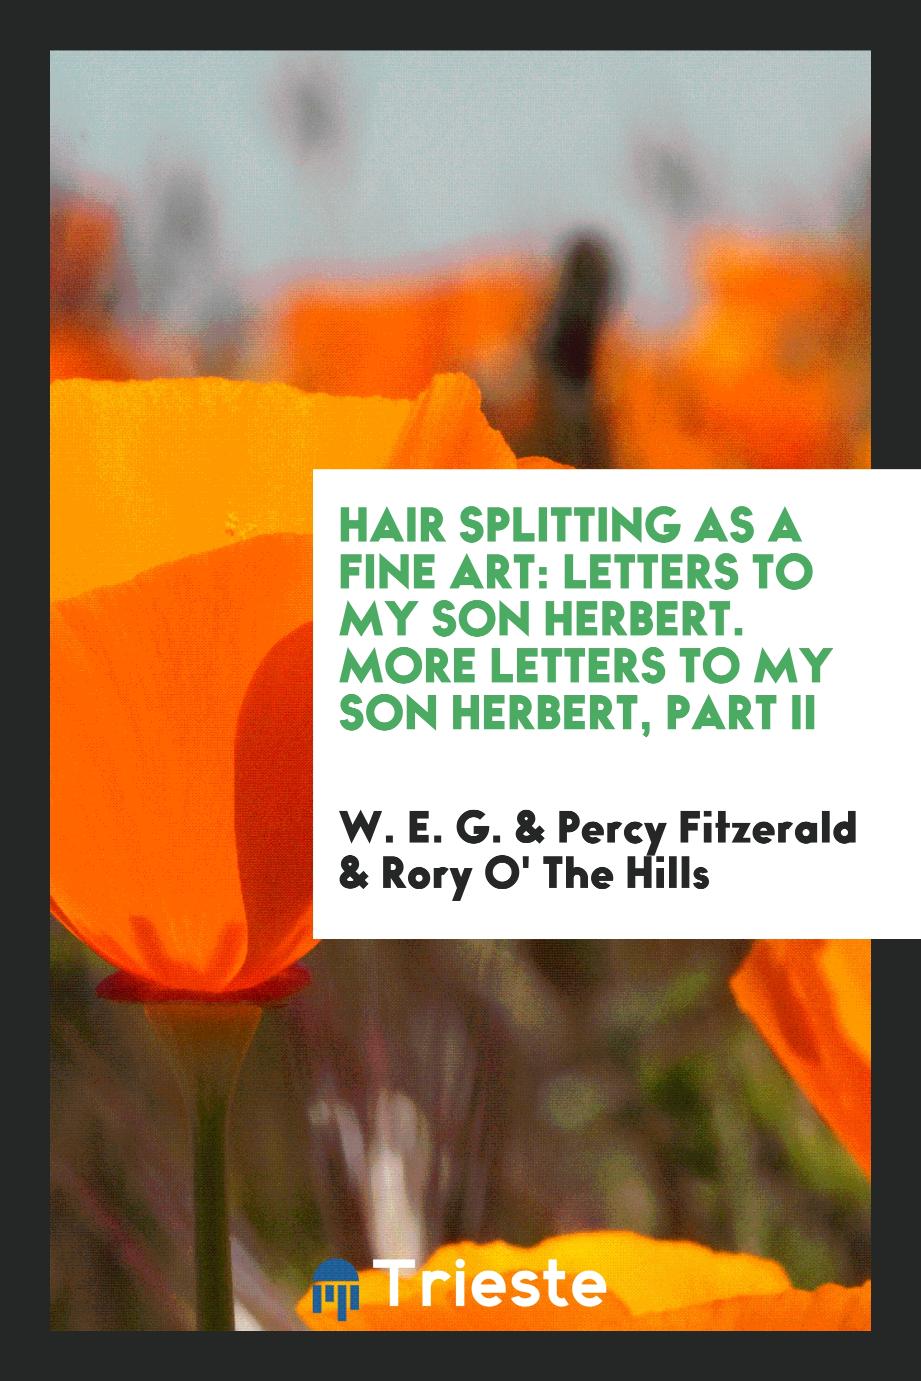 Hair Splitting as a Fine Art: Letters to My Son Herbert. More Letters to my Son Herbert, Part II